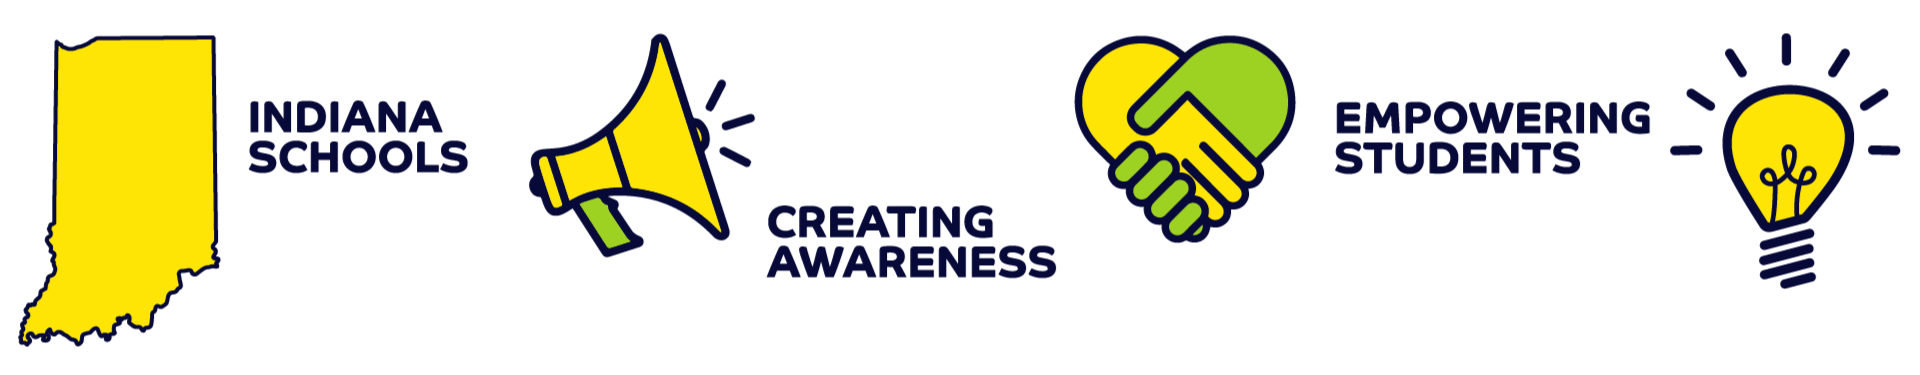 Indiana Schools Creating Awareness Empowering Students Promoting Change Graphic